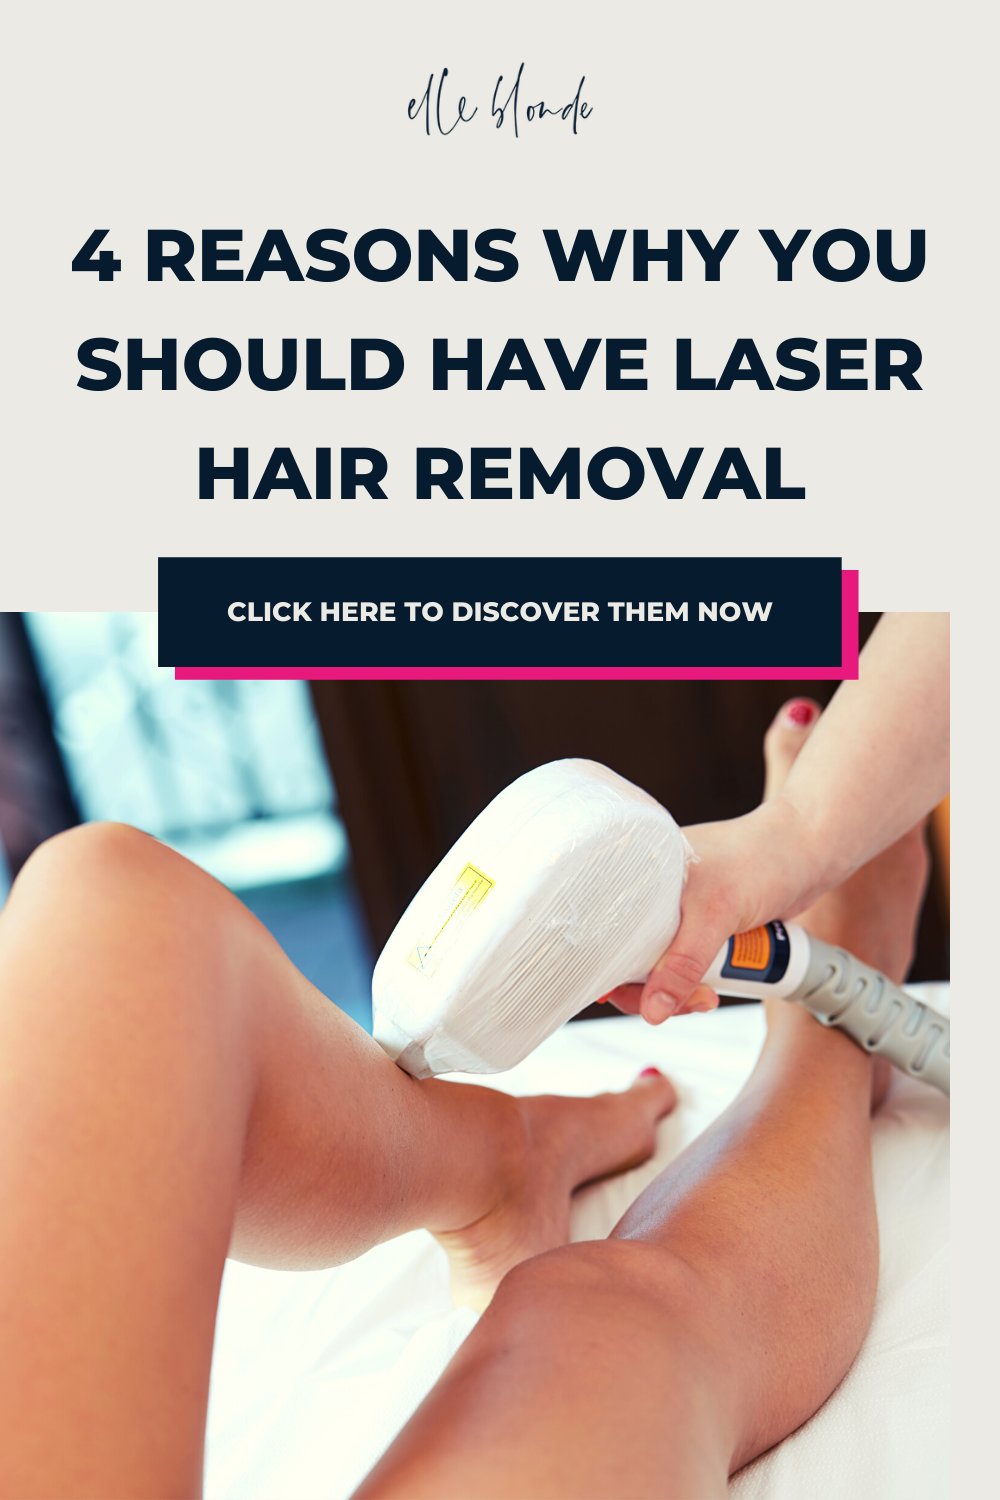 Why you should have laser hair removal to get rid of body hair | Beauty tips | Elle Blonde Luxury Lifestyle Destination Blog